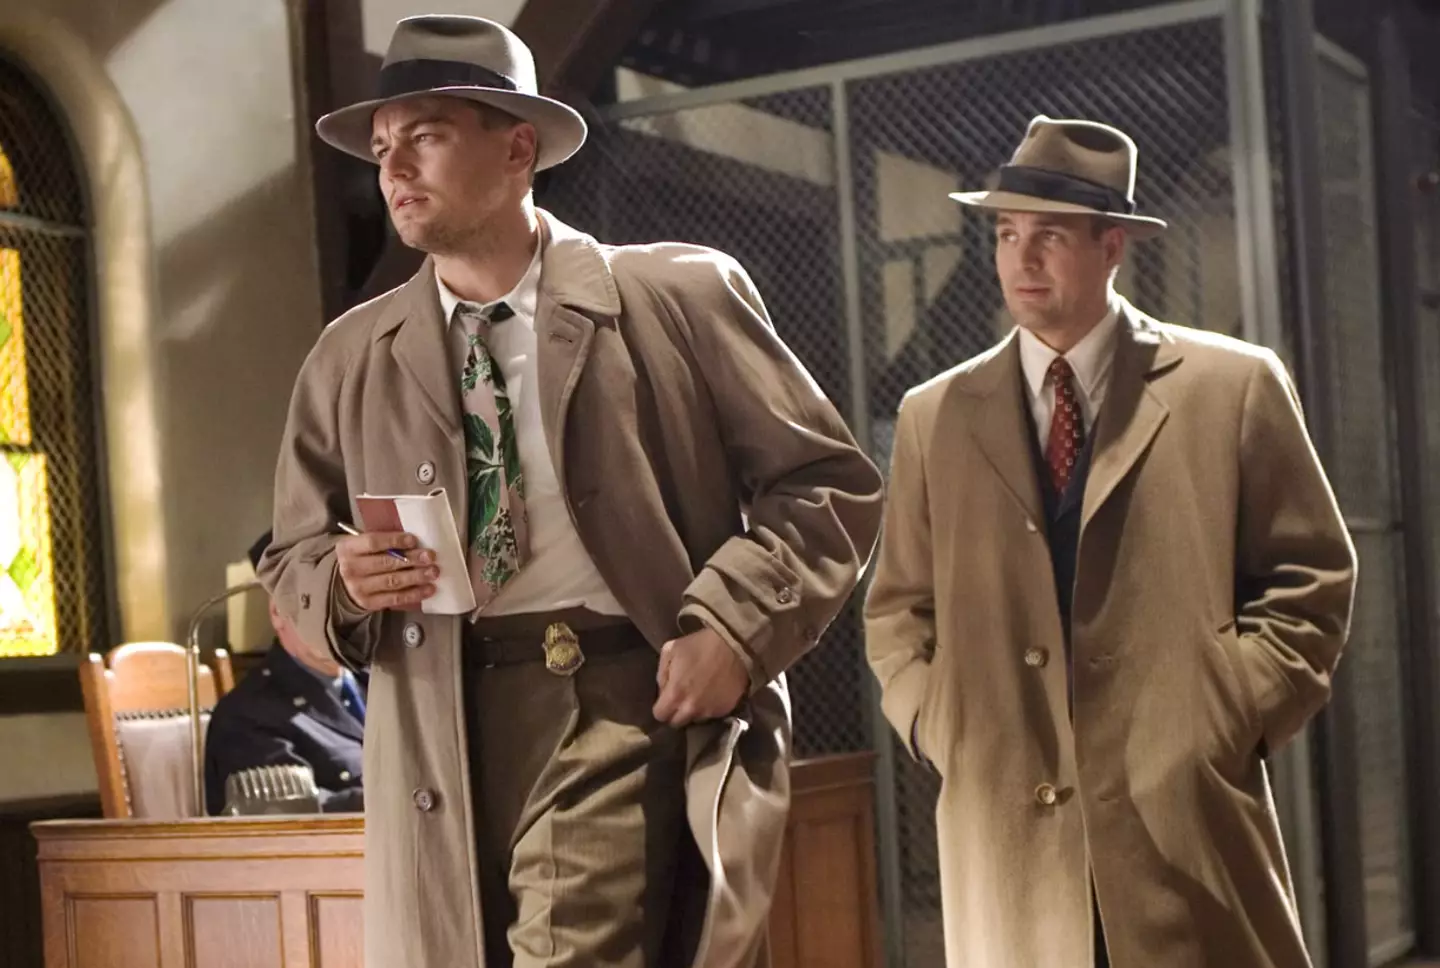 Leonardo DiCaprio's character believes he's a US Marshall in Shutter Island.